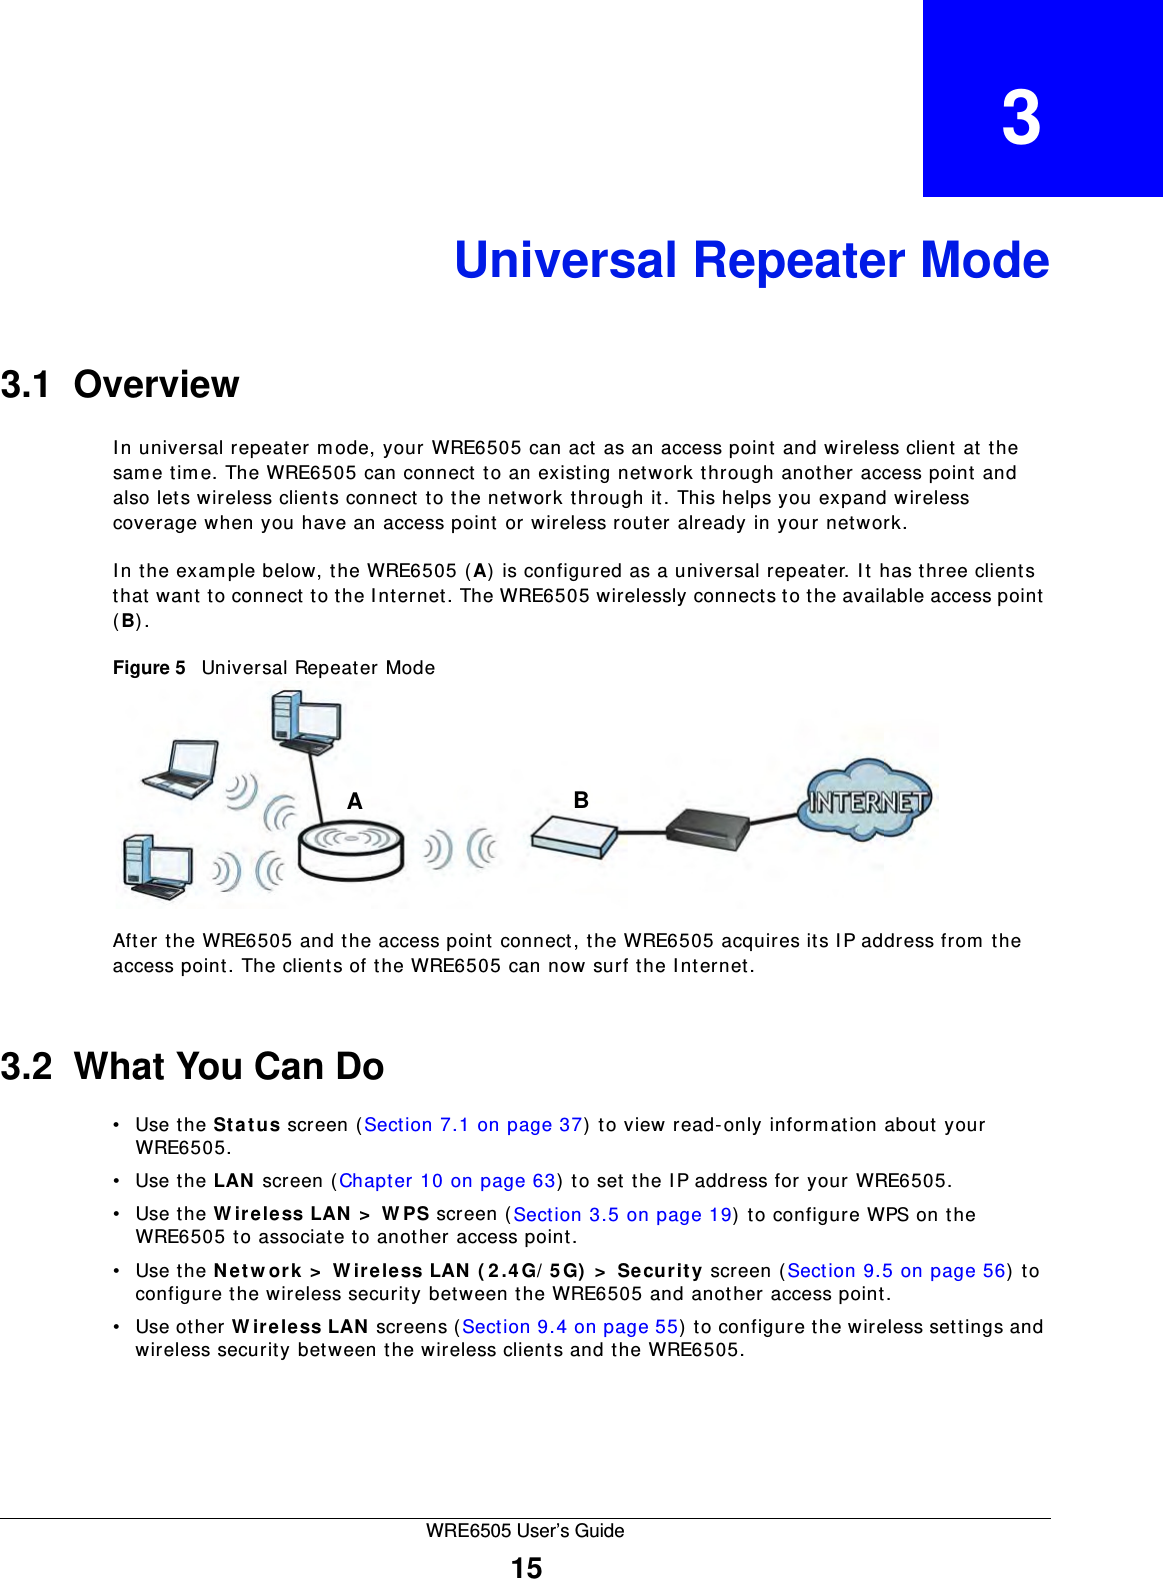 WRE6505 User’s Guide15CHAPTER   3Universal Repeater Mode3.1  OverviewIn universal repeater m ode, your WRE6505 can act as an access point and wireless client at the sam e tim e. The WRE6505 can connect to an existing network through another access point and also lets wireless clients connect to the network through it. This helps you expand wireless coverage when you have an access point or wireless router already in your network.In the example below, the WRE6505 (A) is configured as a universal repeater. I t has three clients that want to connect to the I nternet. The WRE6505 wirelessly connects to the available access point (B). Figure 5   Universal Repeater Mode After the WRE6505 and the access point connect, the WRE6505 acquires its I P address from the access point. The clients of the WRE6505 can now surf the I nternet. 3.2  What You Can Do• Use the St a t u s screen (Section 7.1 on page 37) to view read-only inform ation about your WRE6505.• Use the LAN  screen (Chapter 10 on page 63) to set the I P address for your WRE6505.• Use the W ire le ss LAN  &gt;  W PS screen (Section 3.5 on page 19) to configure WPS on the WRE6505 to associate to another access point. • Use the N e t w or k  &gt;  W ireless LAN  ( 2 .4 G/ 5 G)  &gt;  Se curit y screen (Section 9.5 on page 56) to configure the wireless security between the WRE6505 and another access point. • Use other W ir eless LAN  screens (Section 9.4 on page 55) to configure the wireless settings and wireless security between the wireless clients and the WRE6505.AB